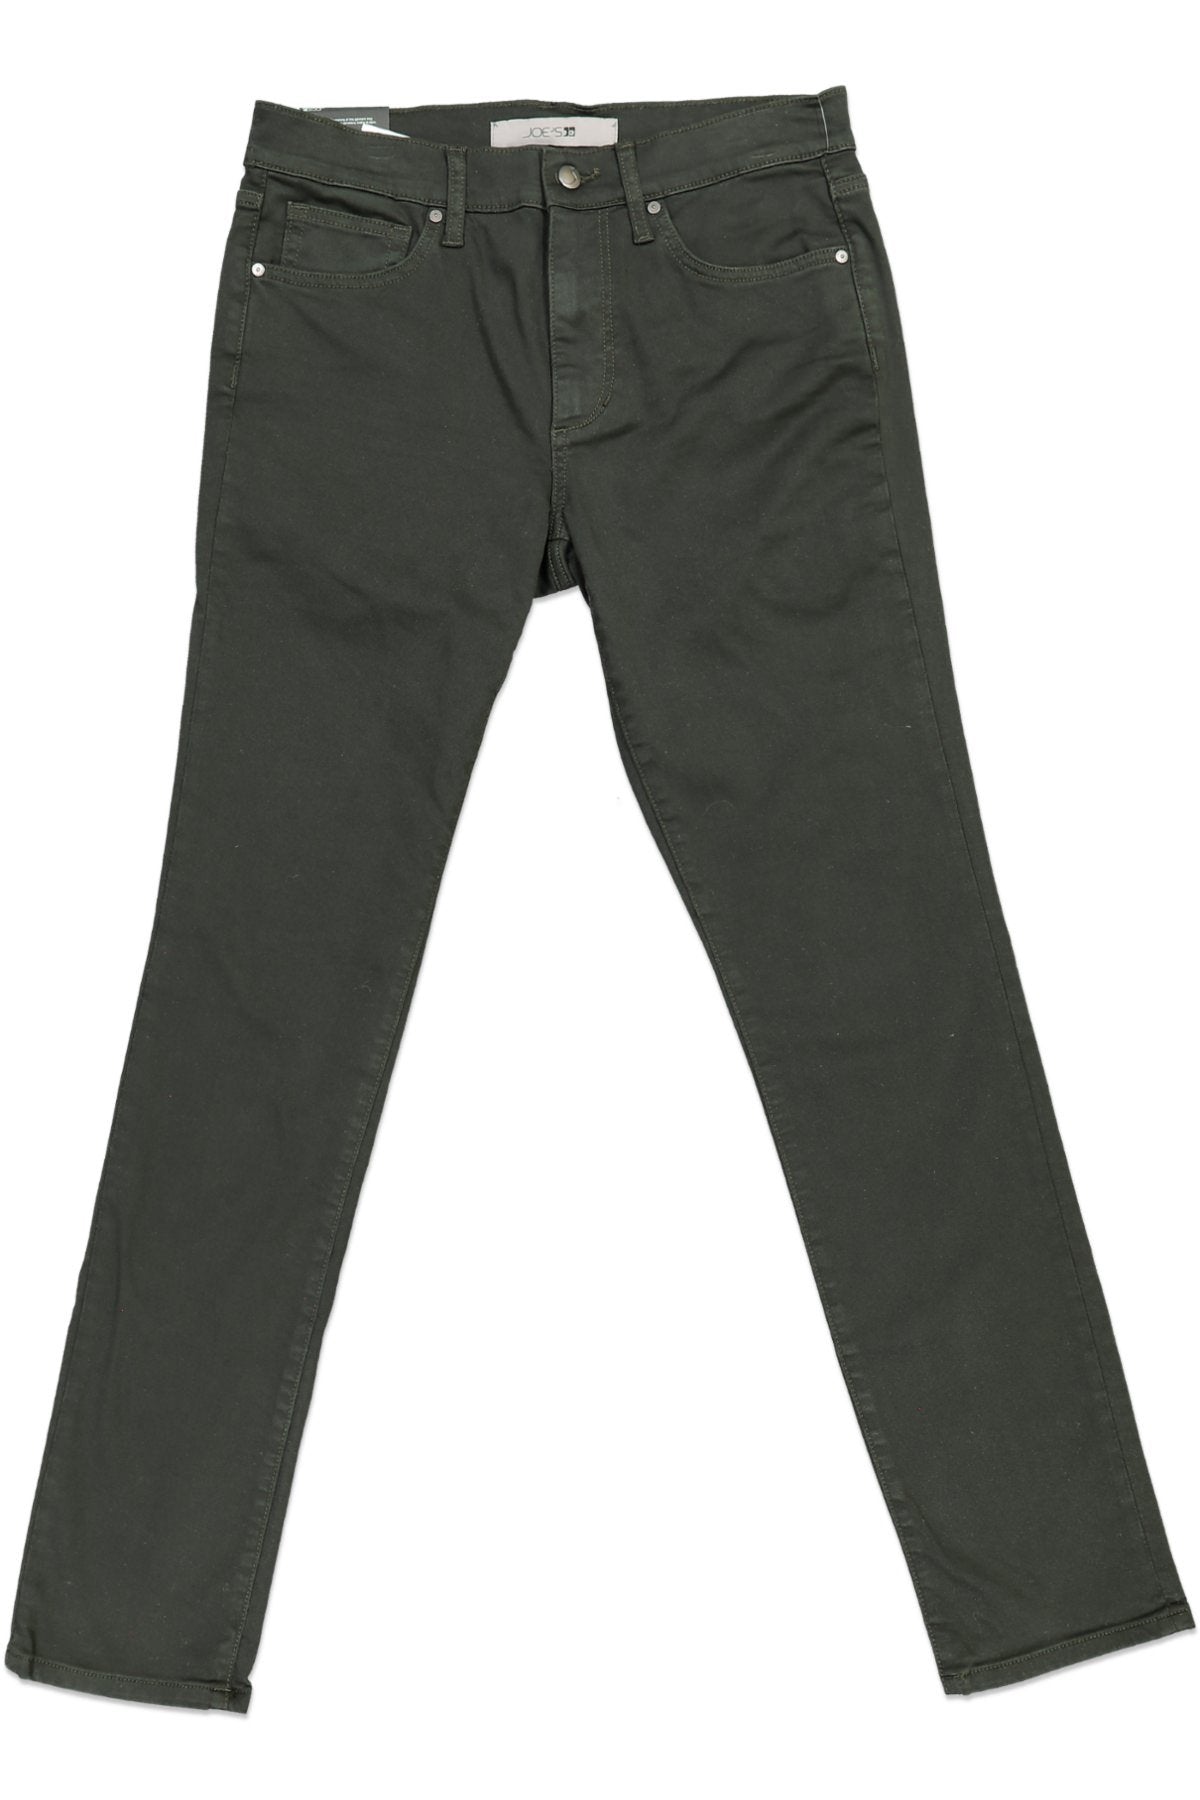 Joes Jeans Hunt Washed French Terry Pants Dark Green